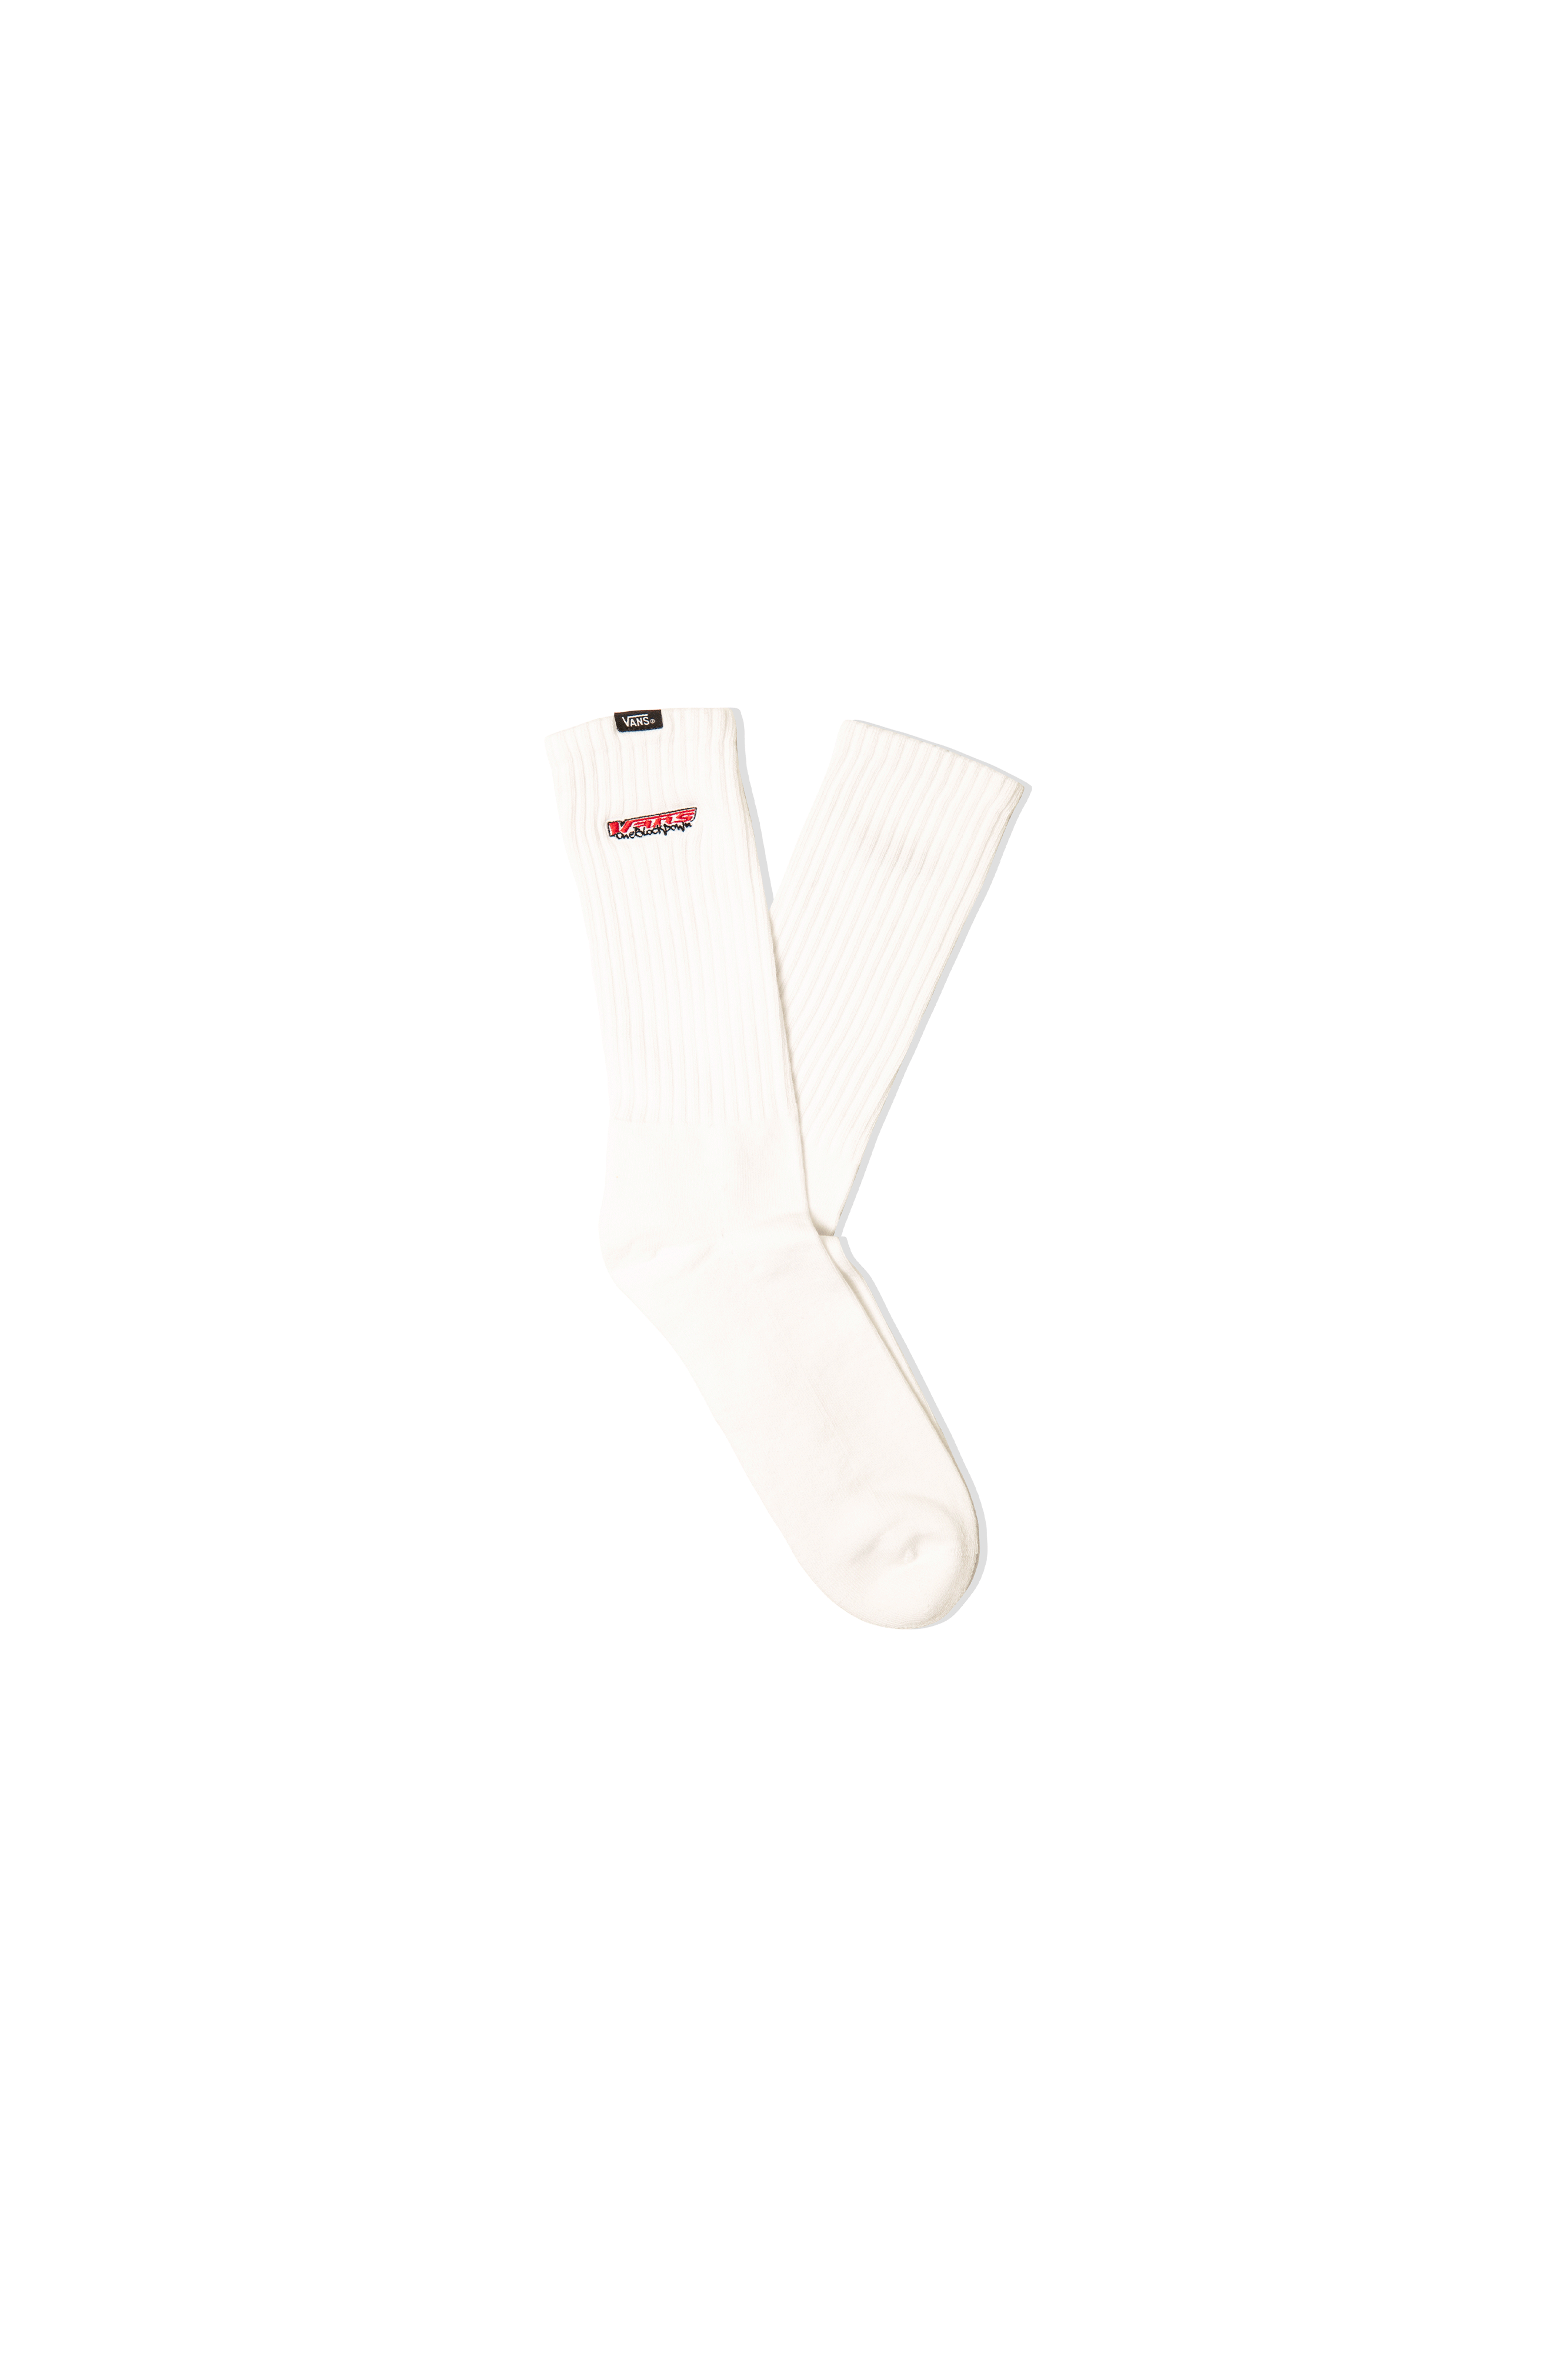 Embroidered Socks x One Block Down.